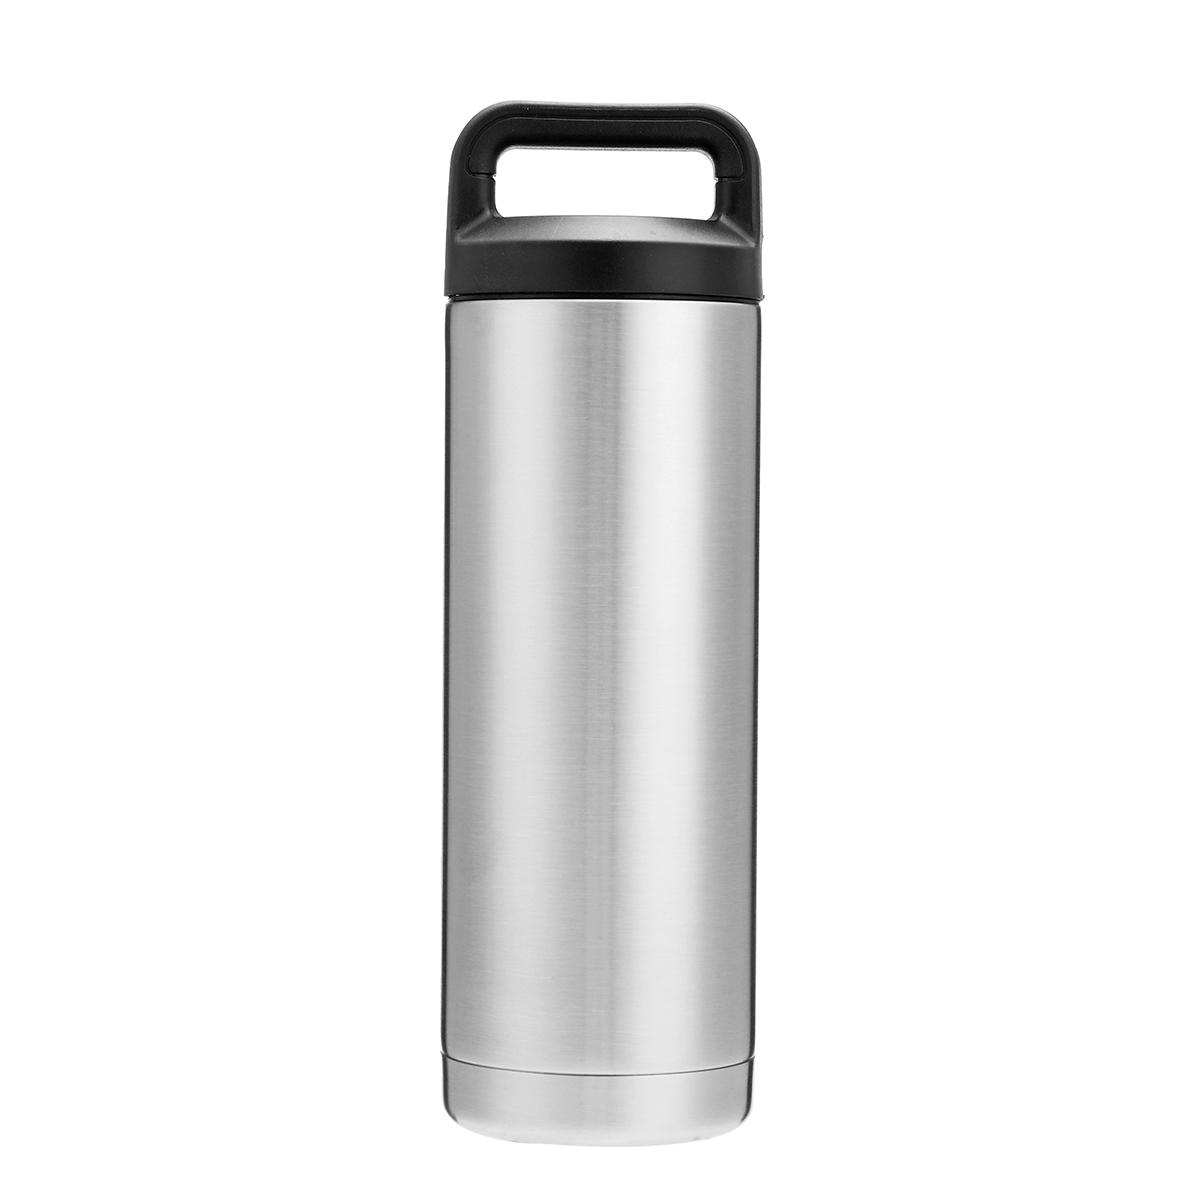 18oz 36oz 64oz Stainless Steel Water Bottle Mug Vacuum Flask Double Wall Insulated Thermos Cooling Beer Cup